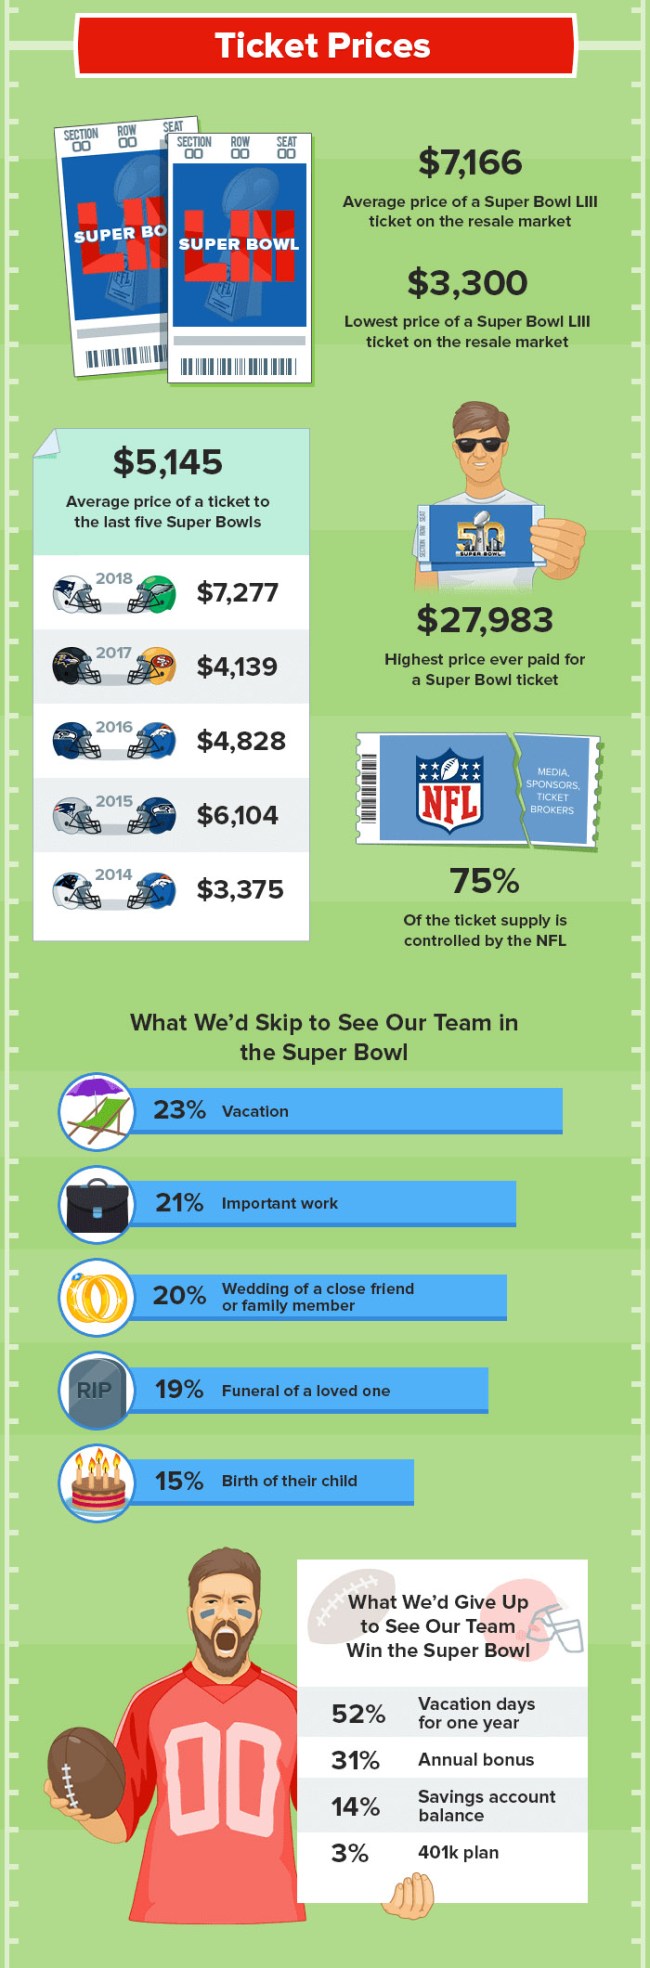 Super Bowl LIII By The Numbers Tickets, Food, Ads, Economics, Media, Betting And More